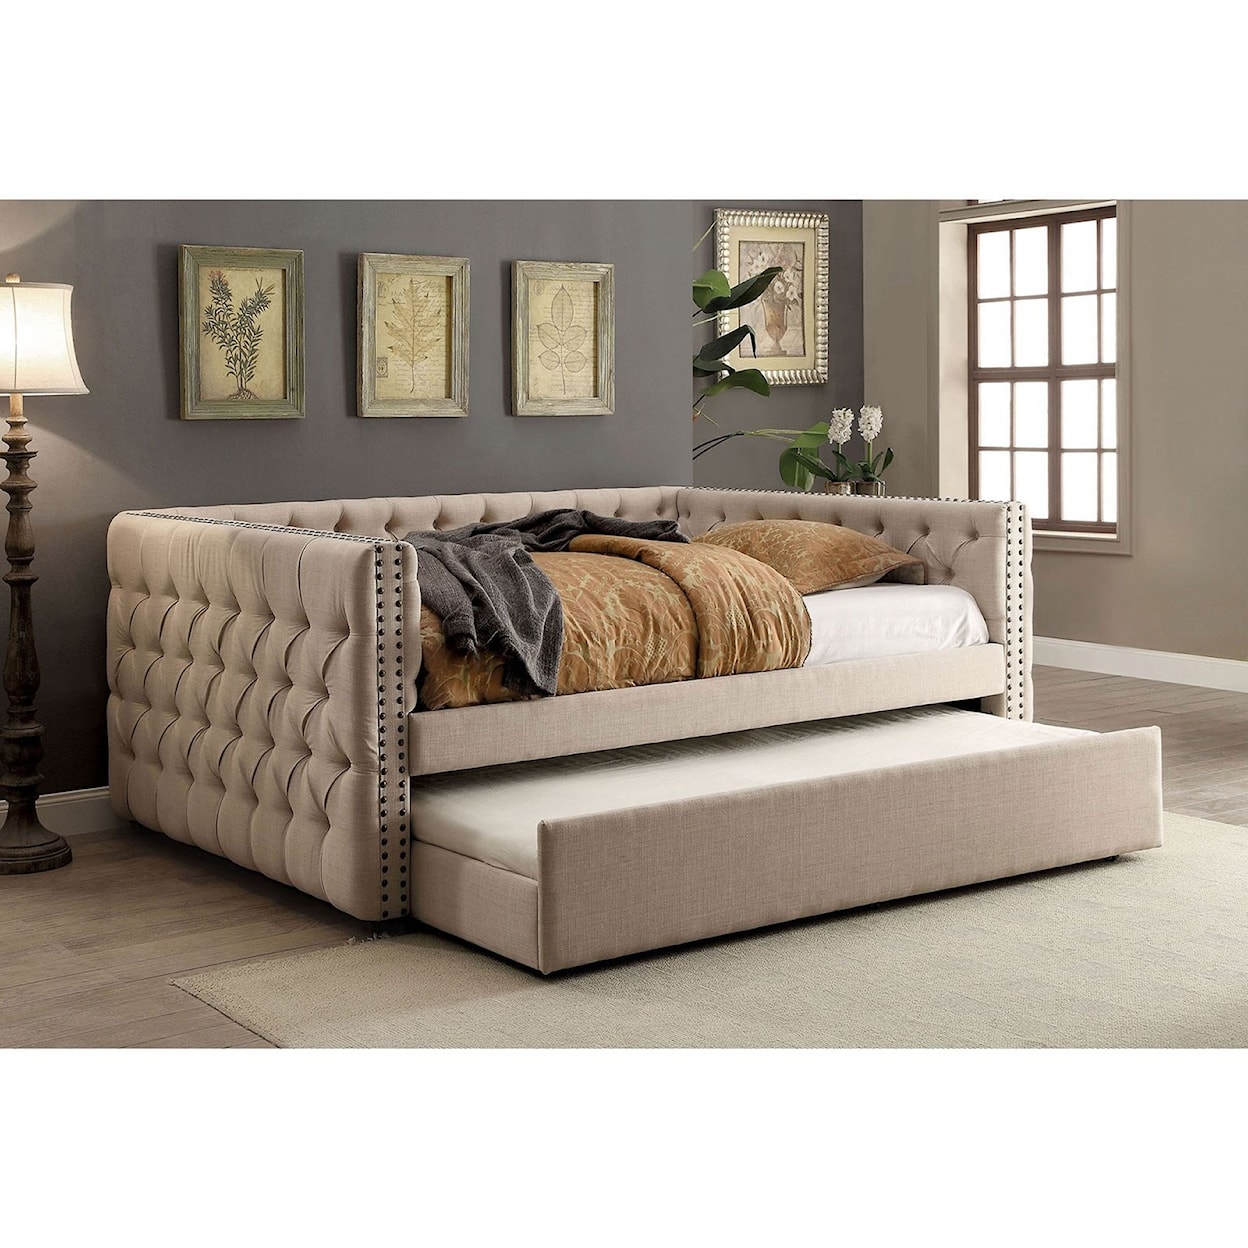 Furniture of America Suzanne Full Daybed with Trundle